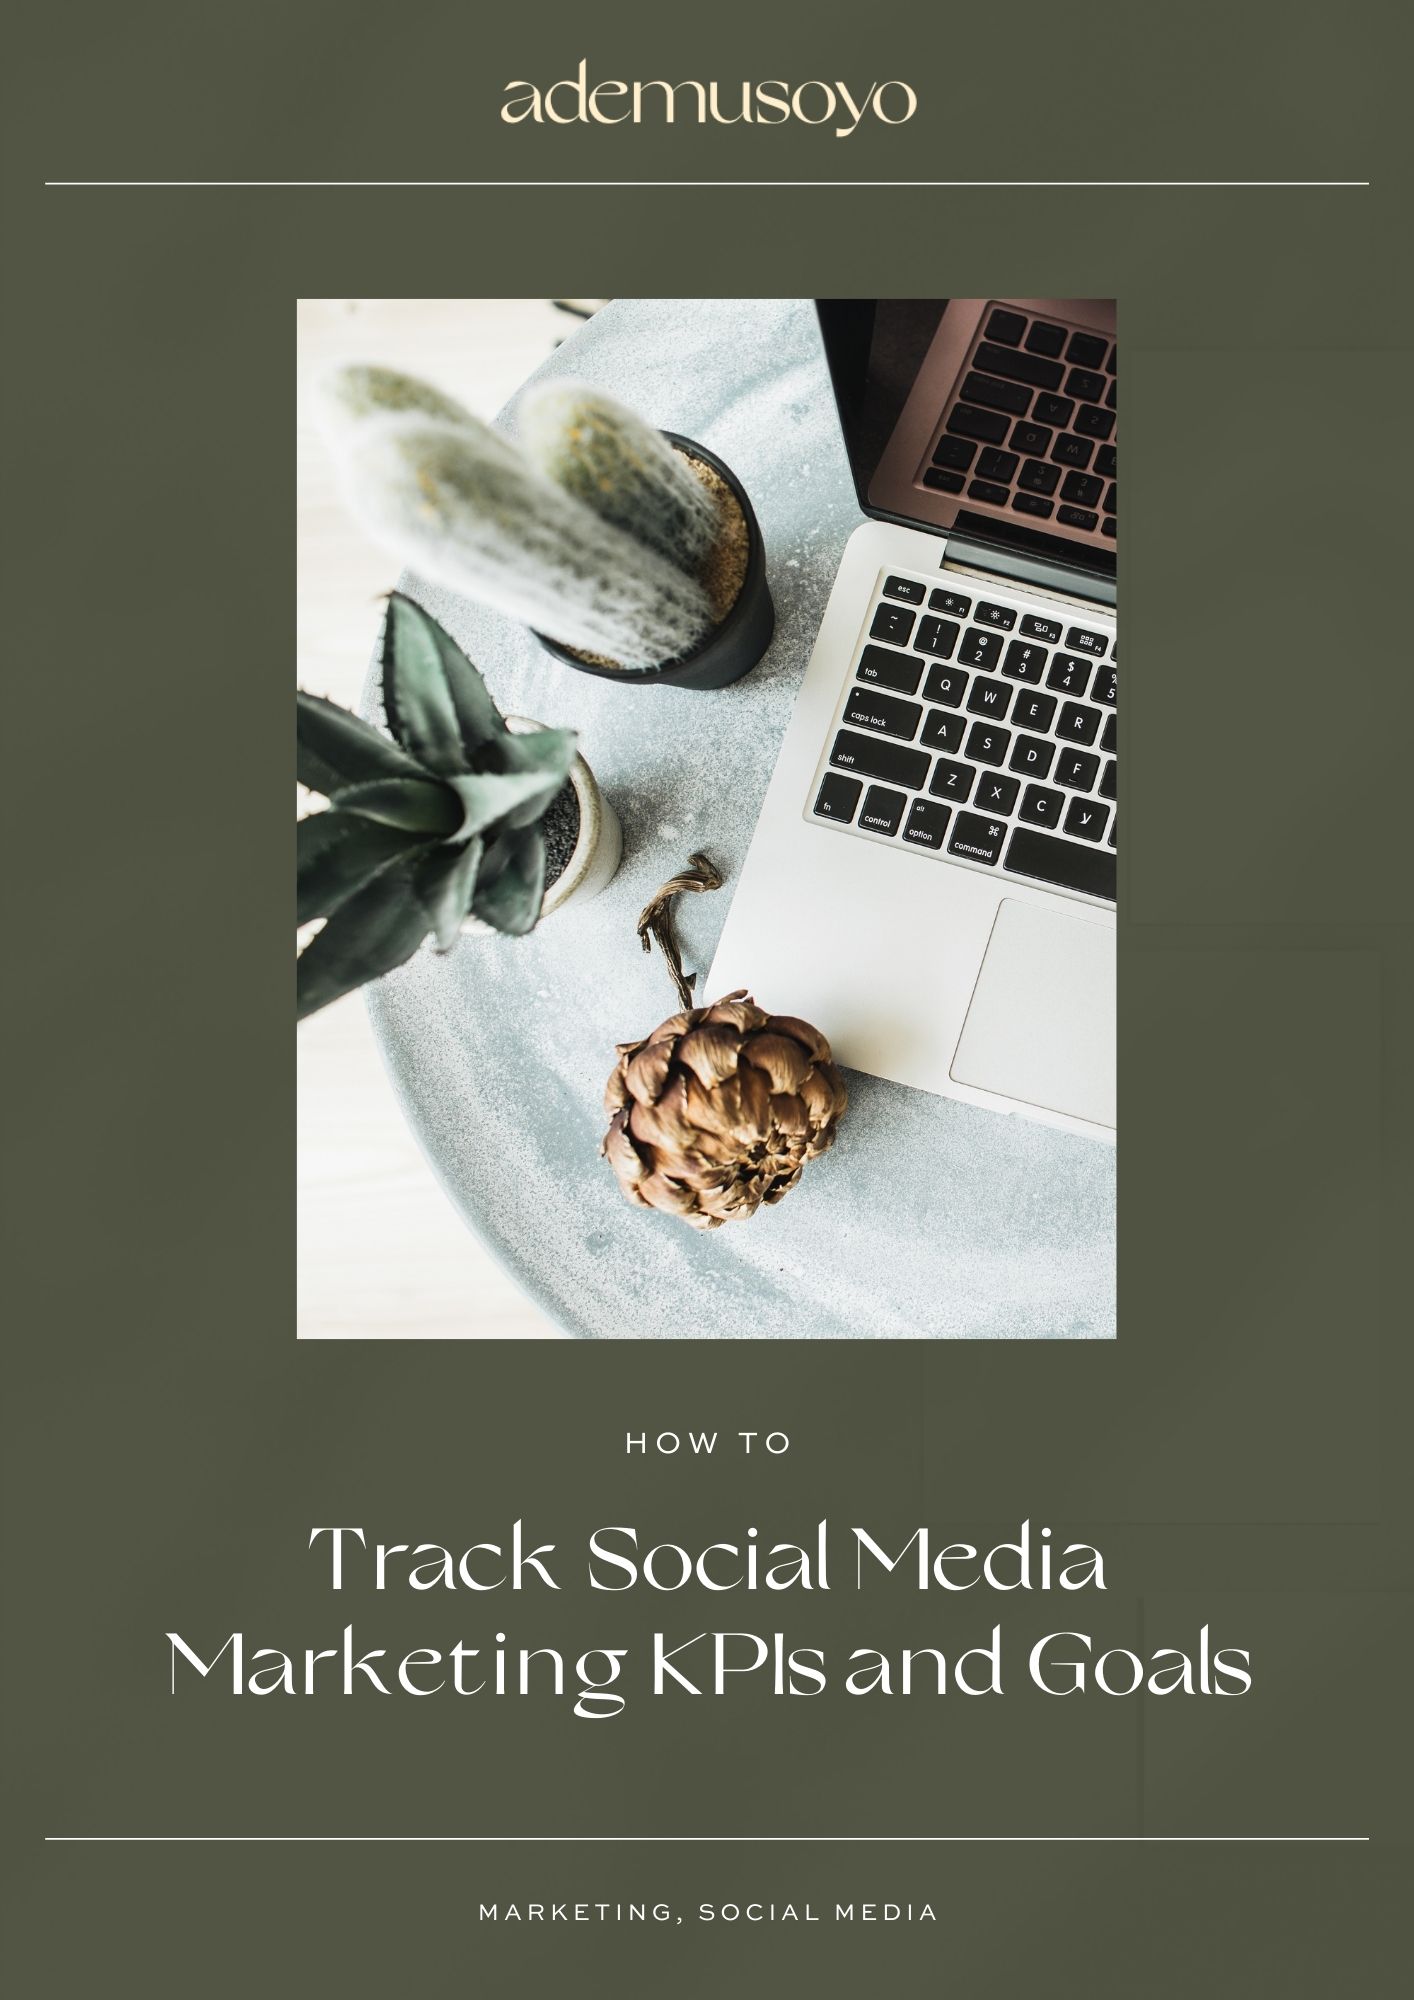 How to Track Social Media Marketing KPIs and Goals